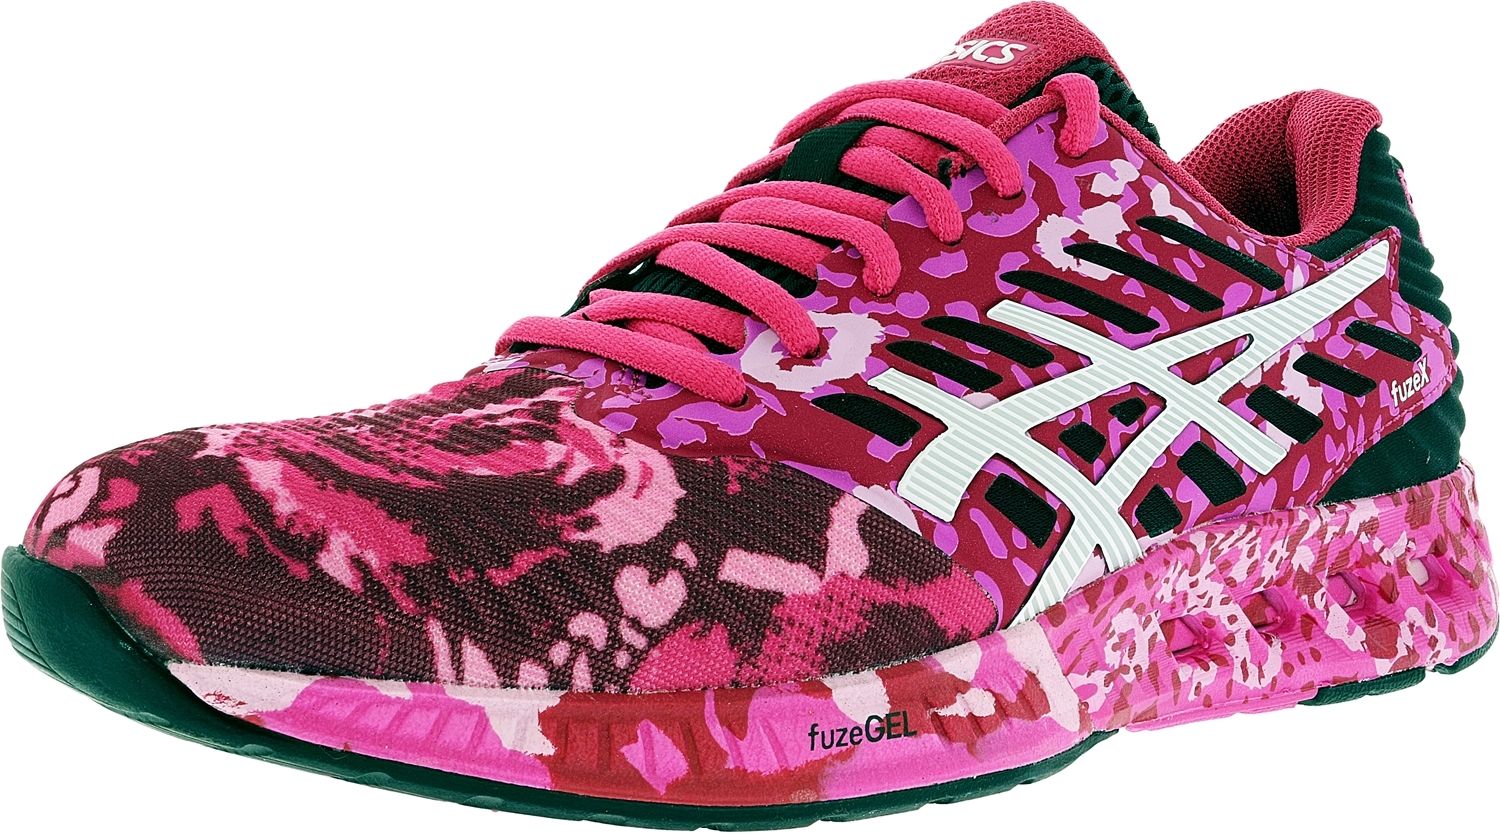 Asics Women’s Fuzex Pr Ankle-High Sneakers Only $31.19!